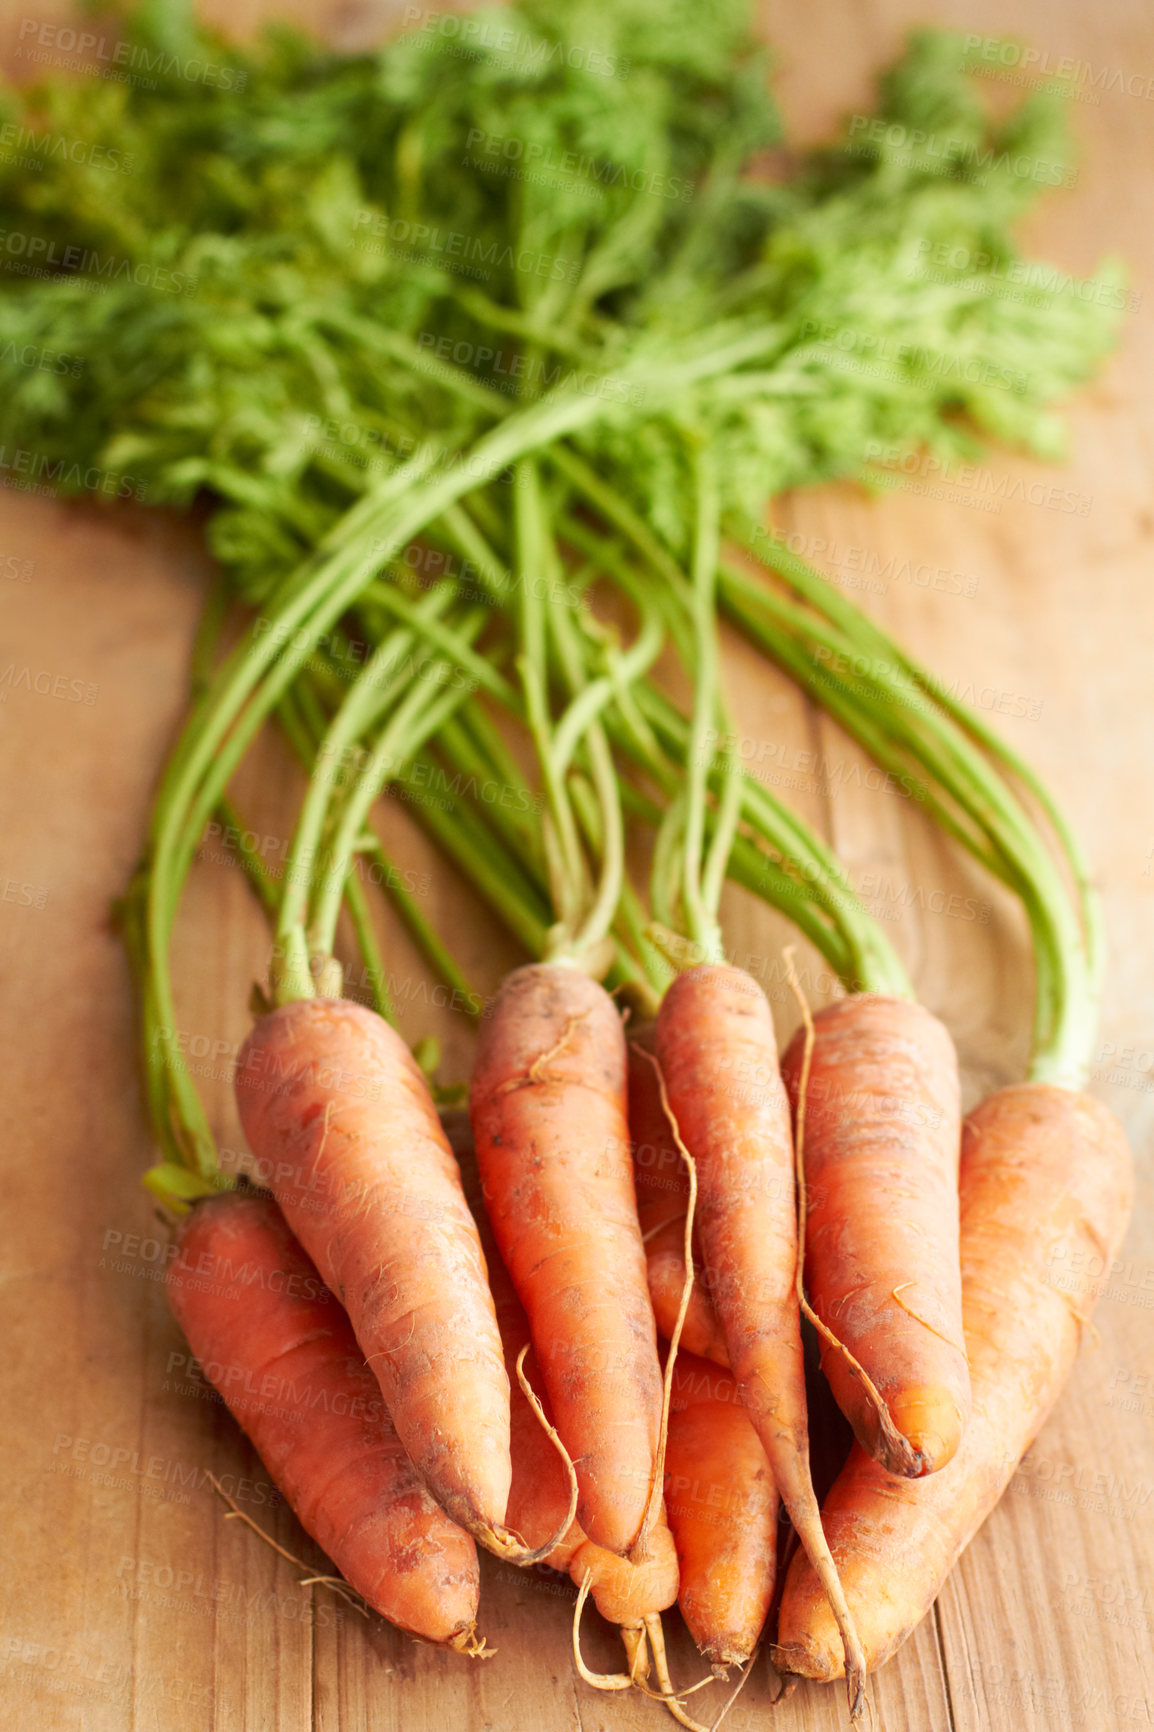 Buy stock photo Carrots on a countertop